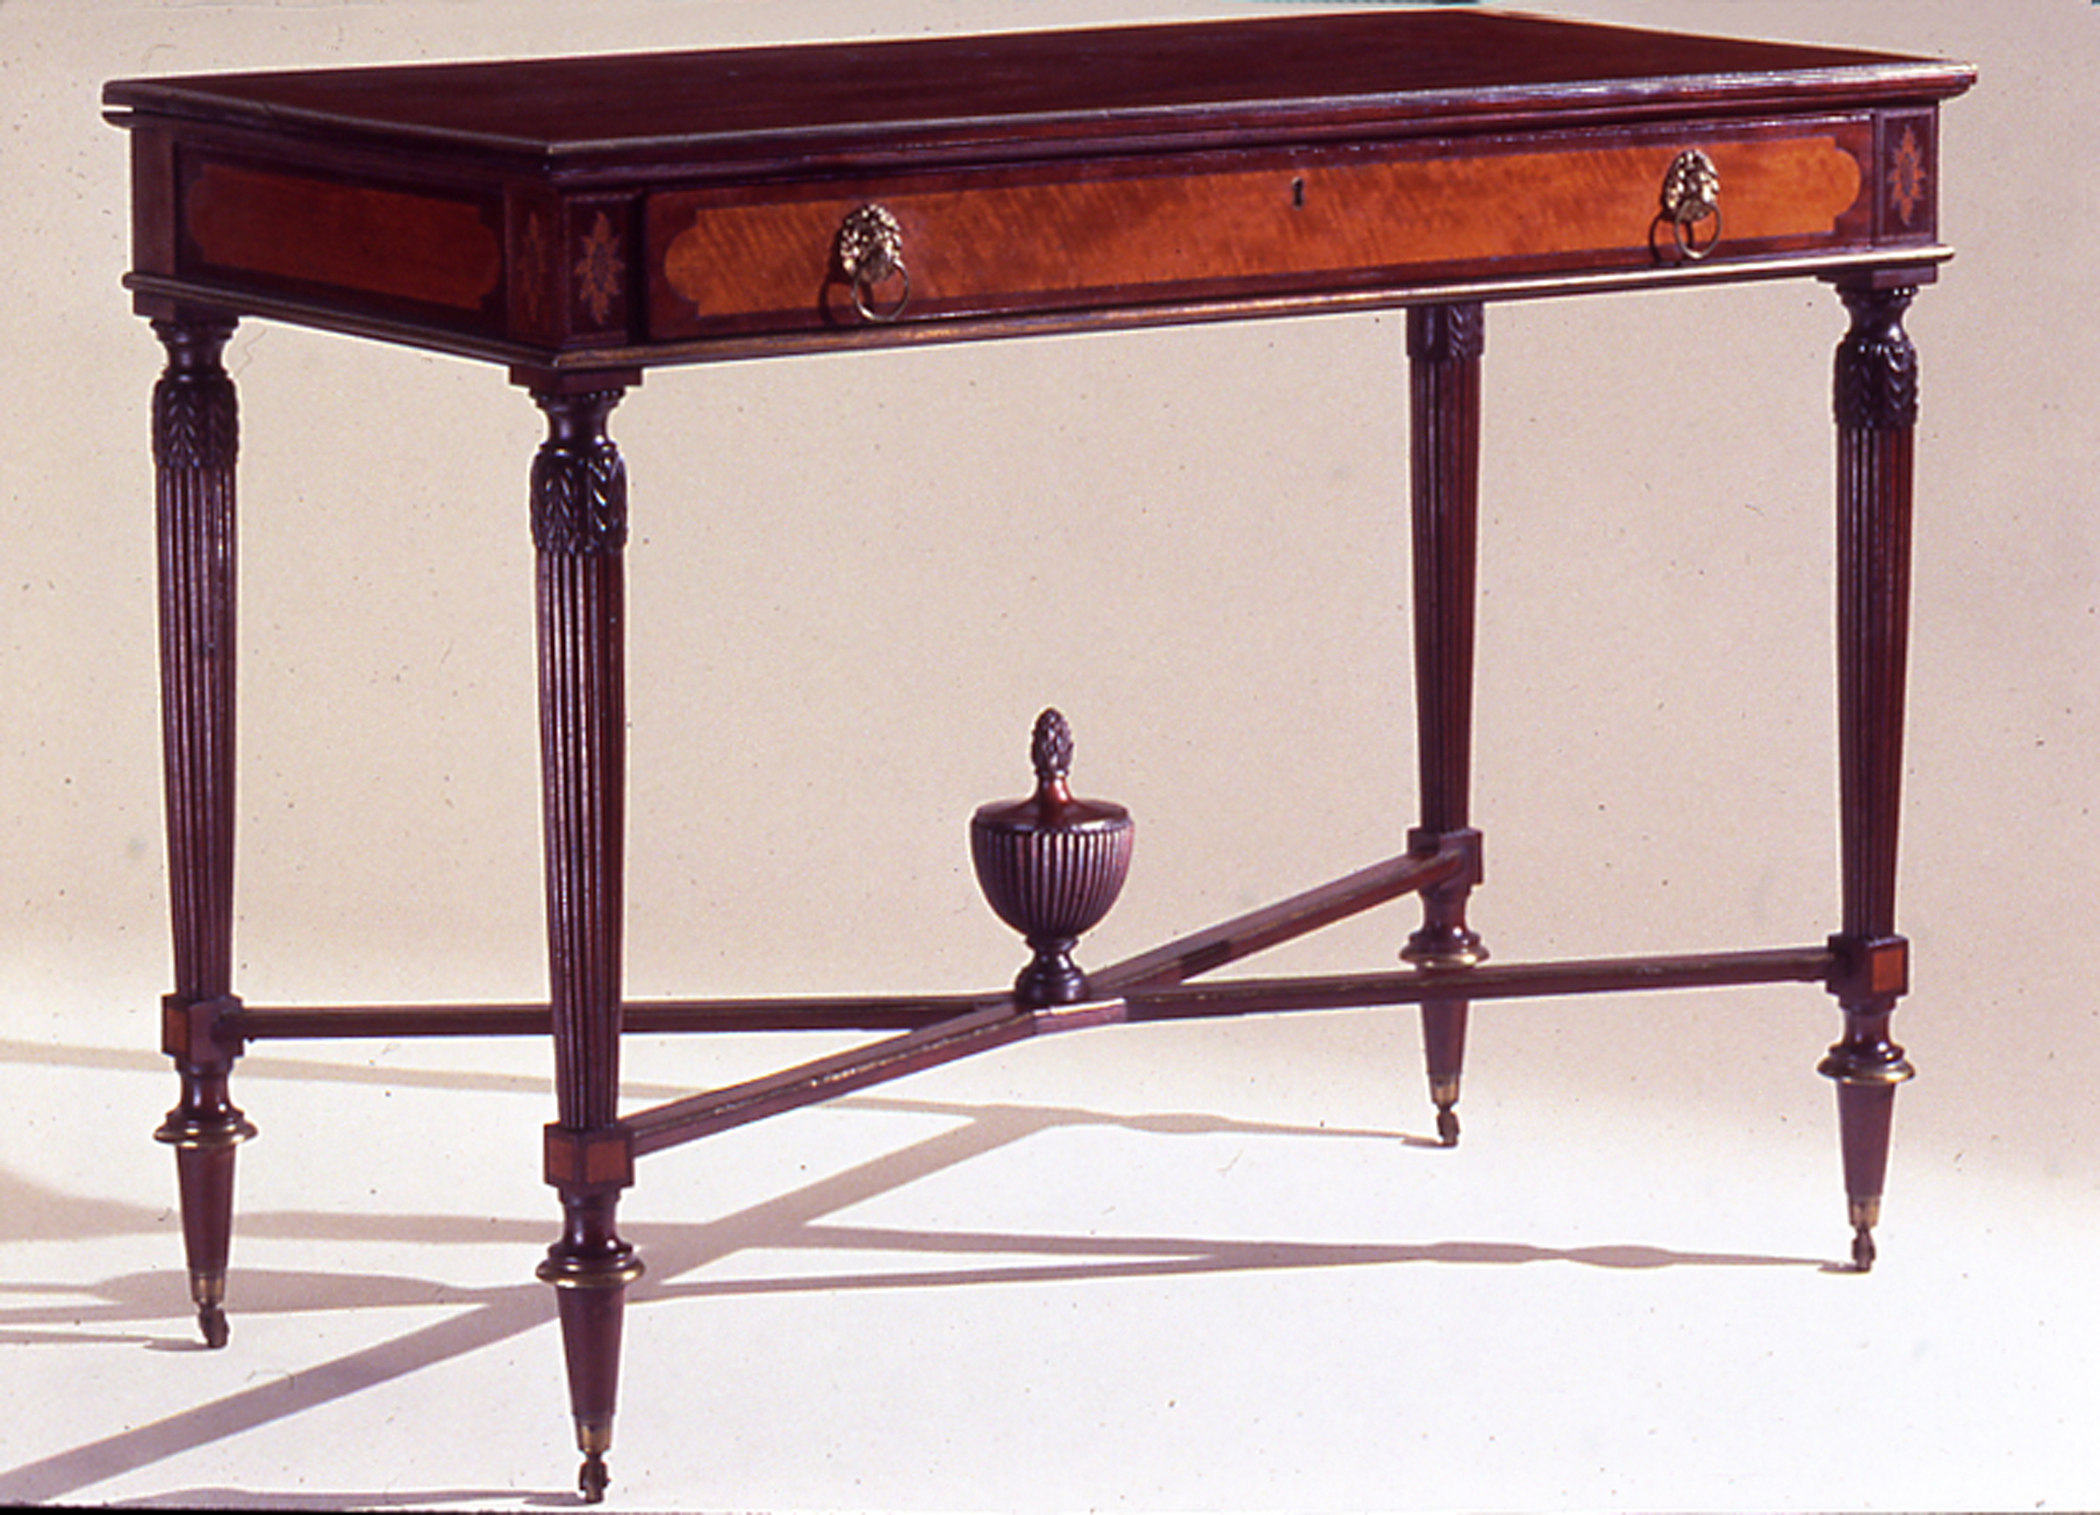 1957.0685 Table, pier table